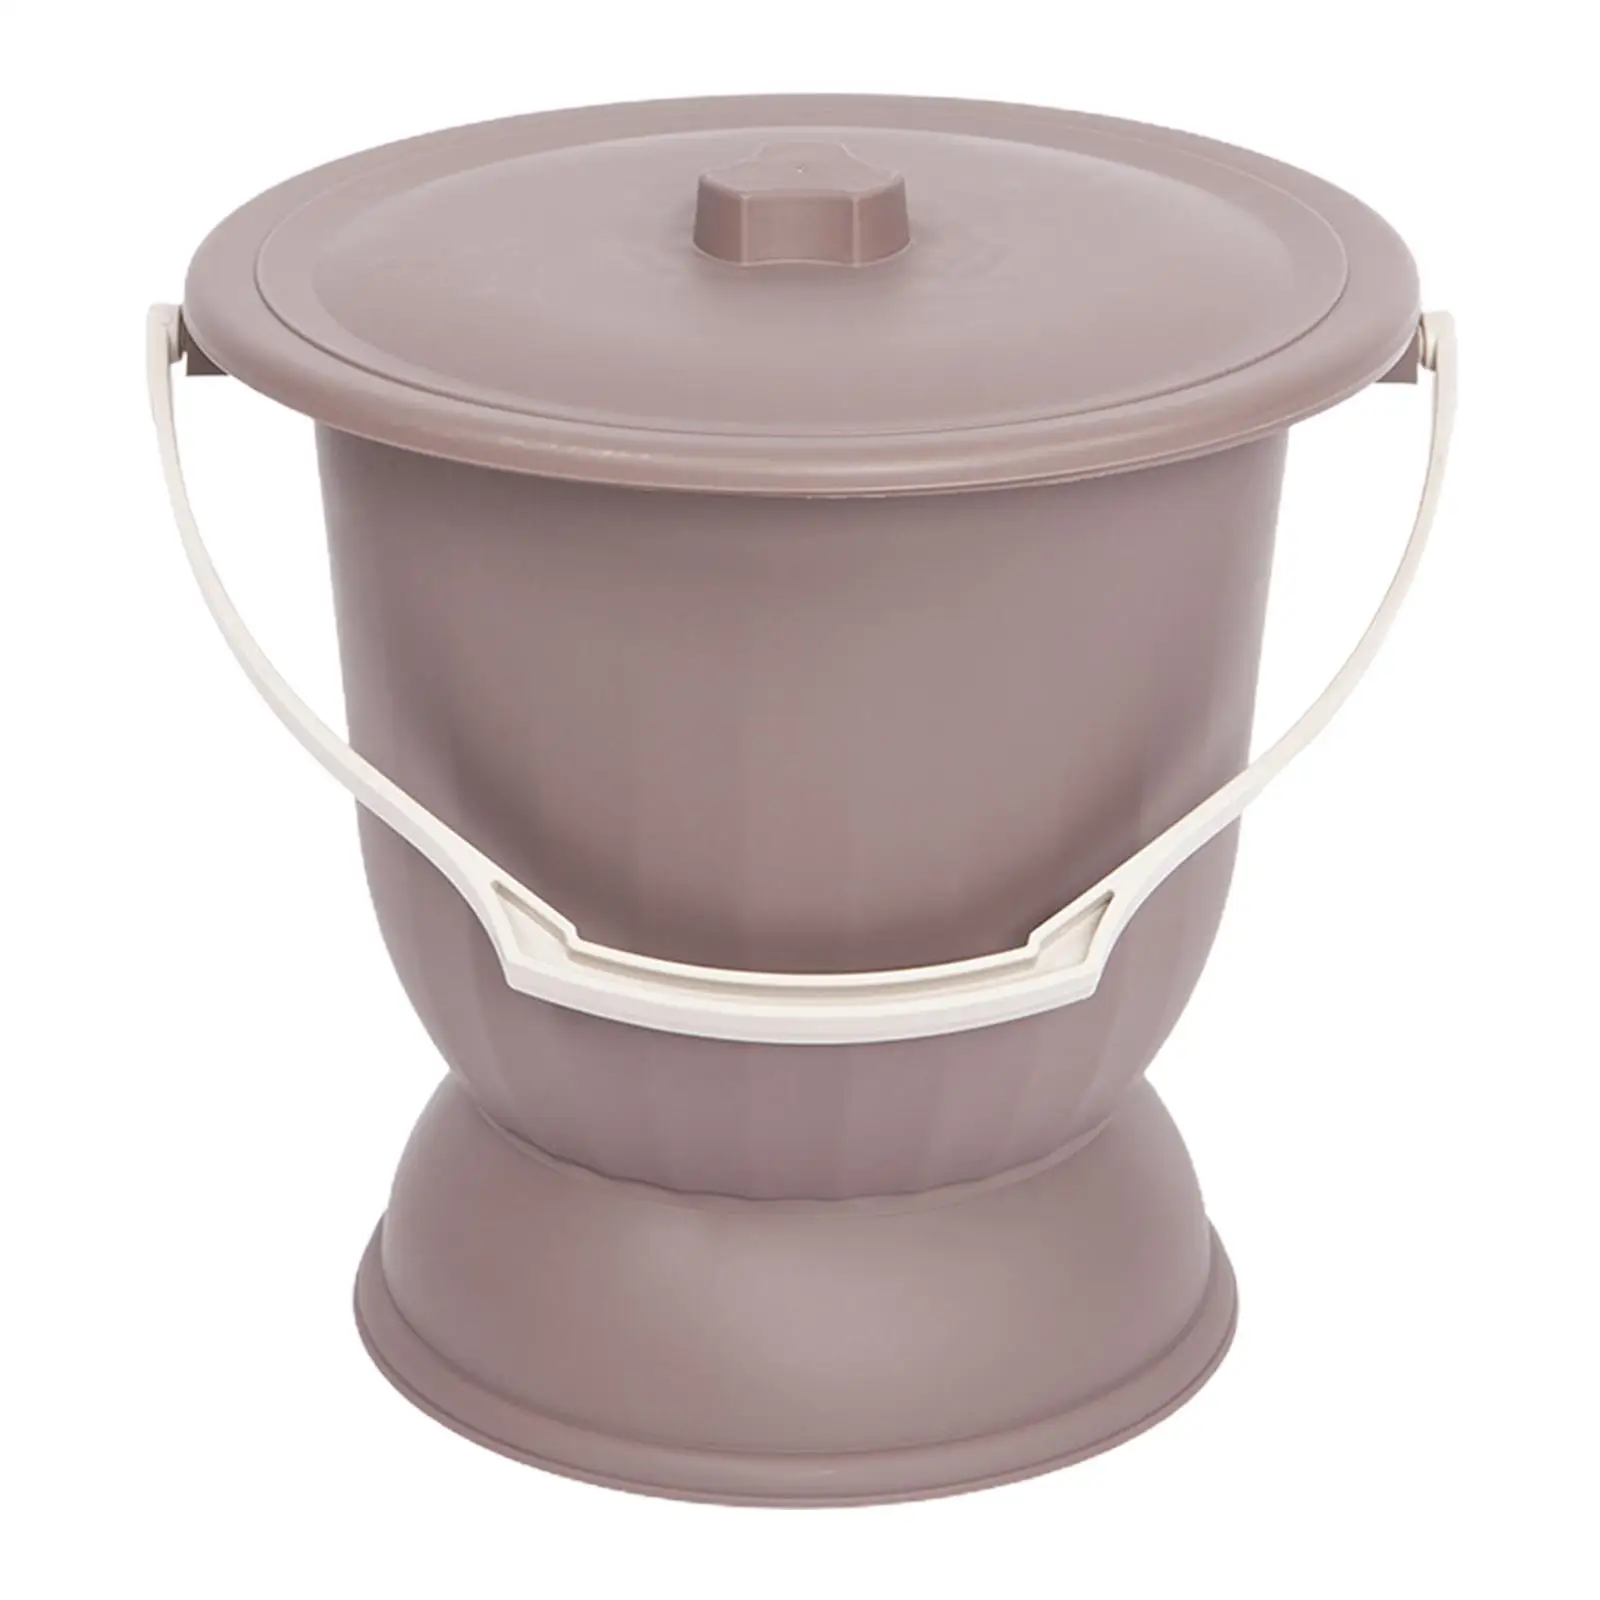 Spittoon with Lid and Handle Urine Bottle Bedside Commode Bucket Chamber Pot for Children